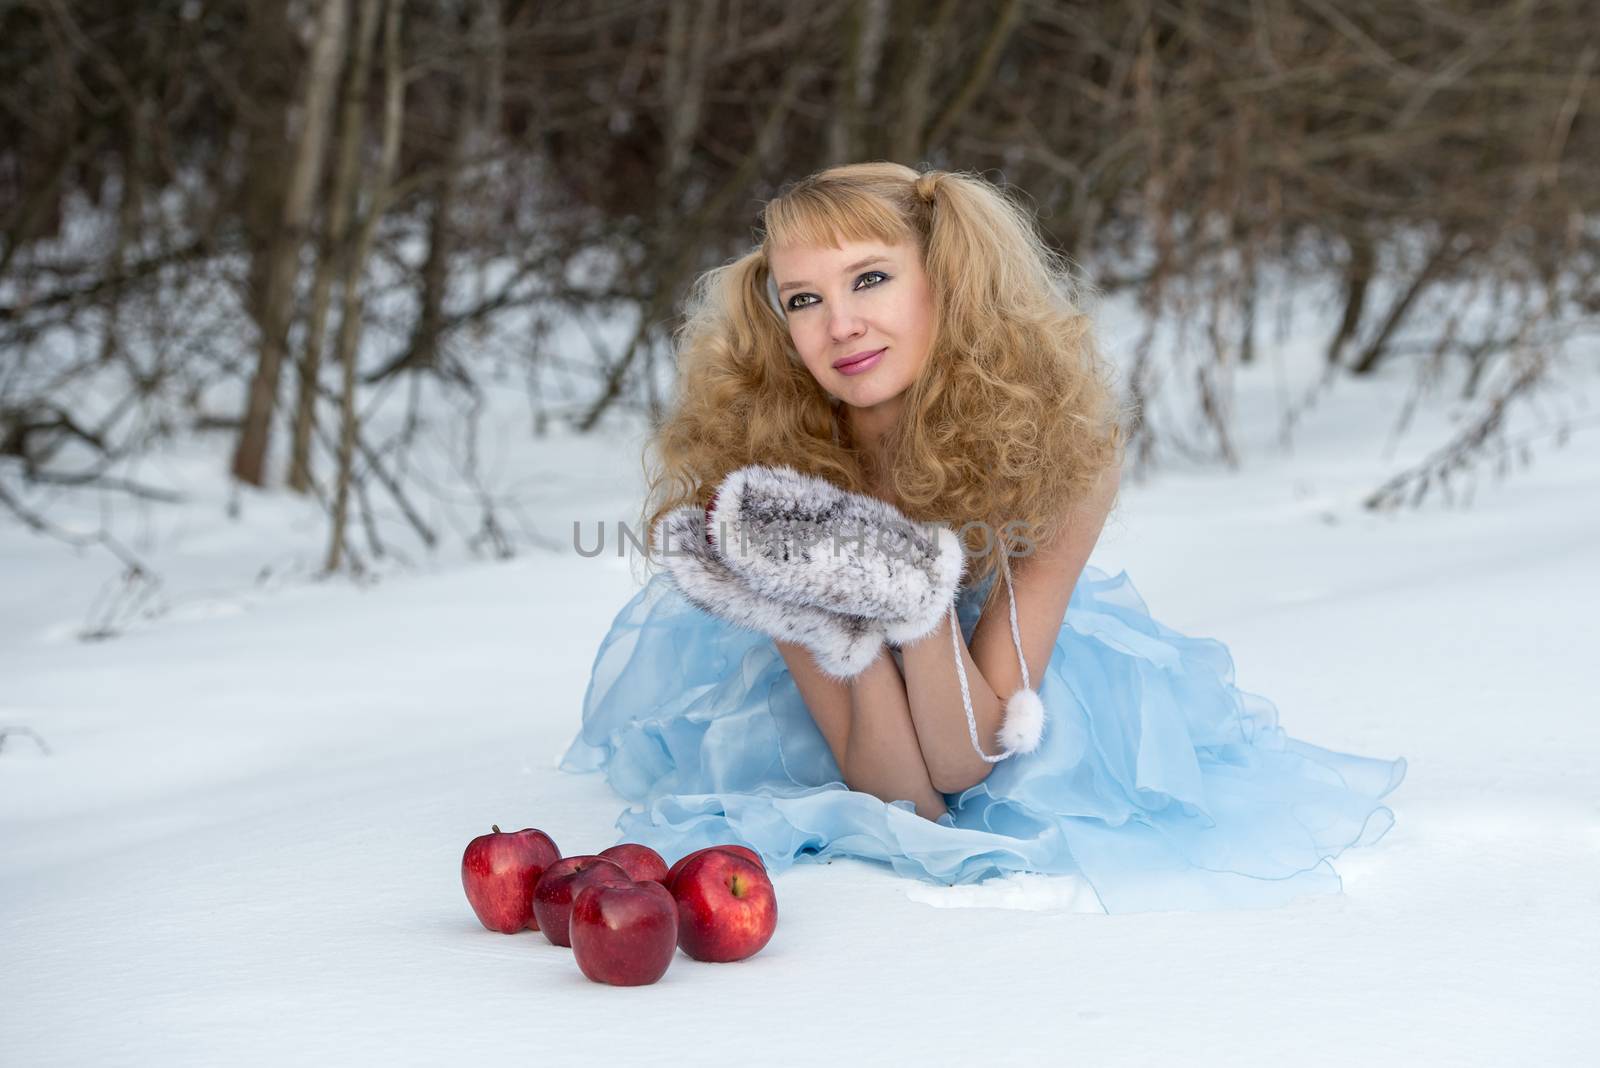 Snow Maiden in a winter forest with apples by nemo269